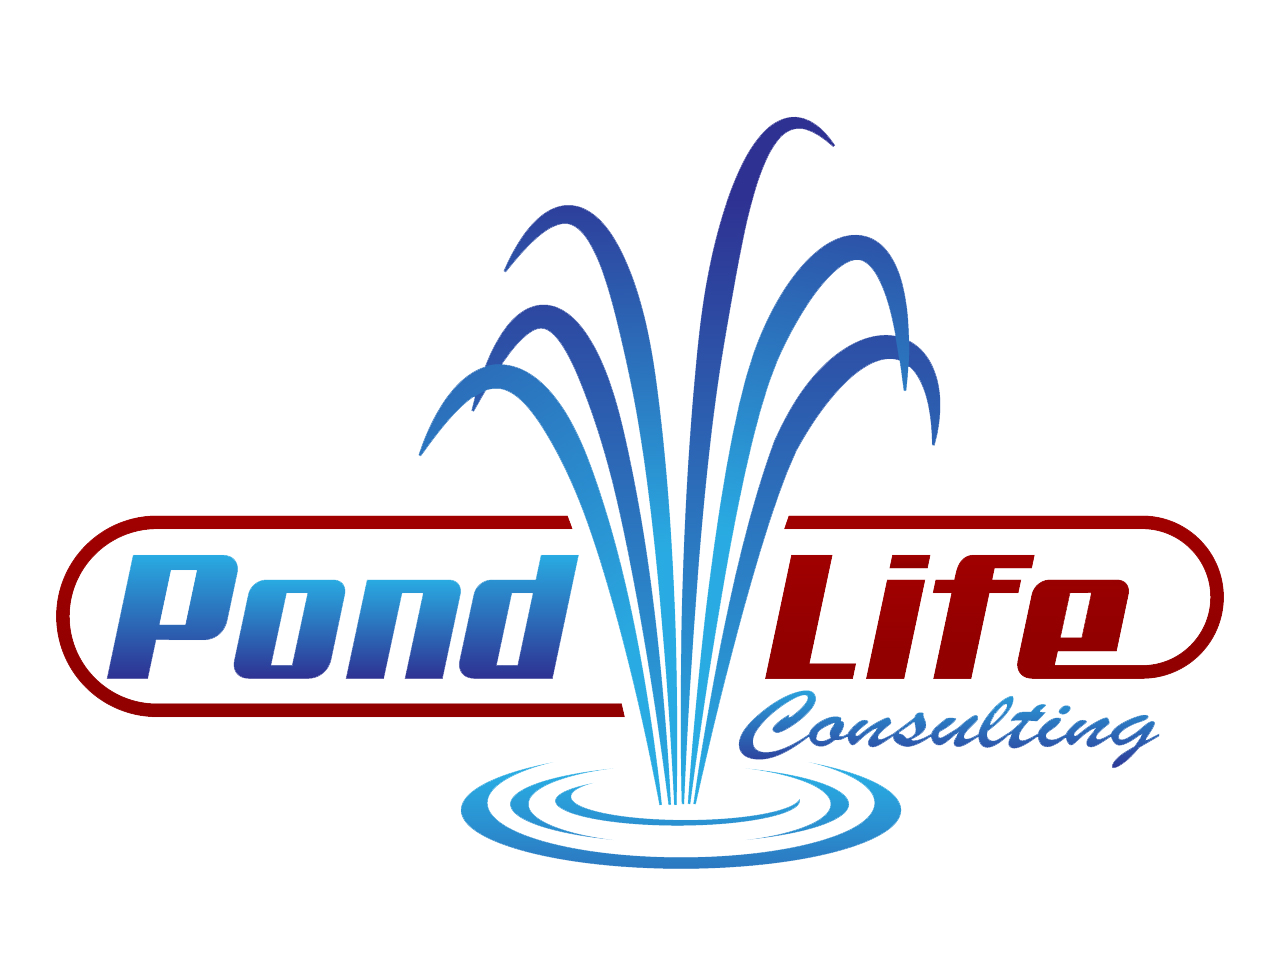 Pond Life Consulting